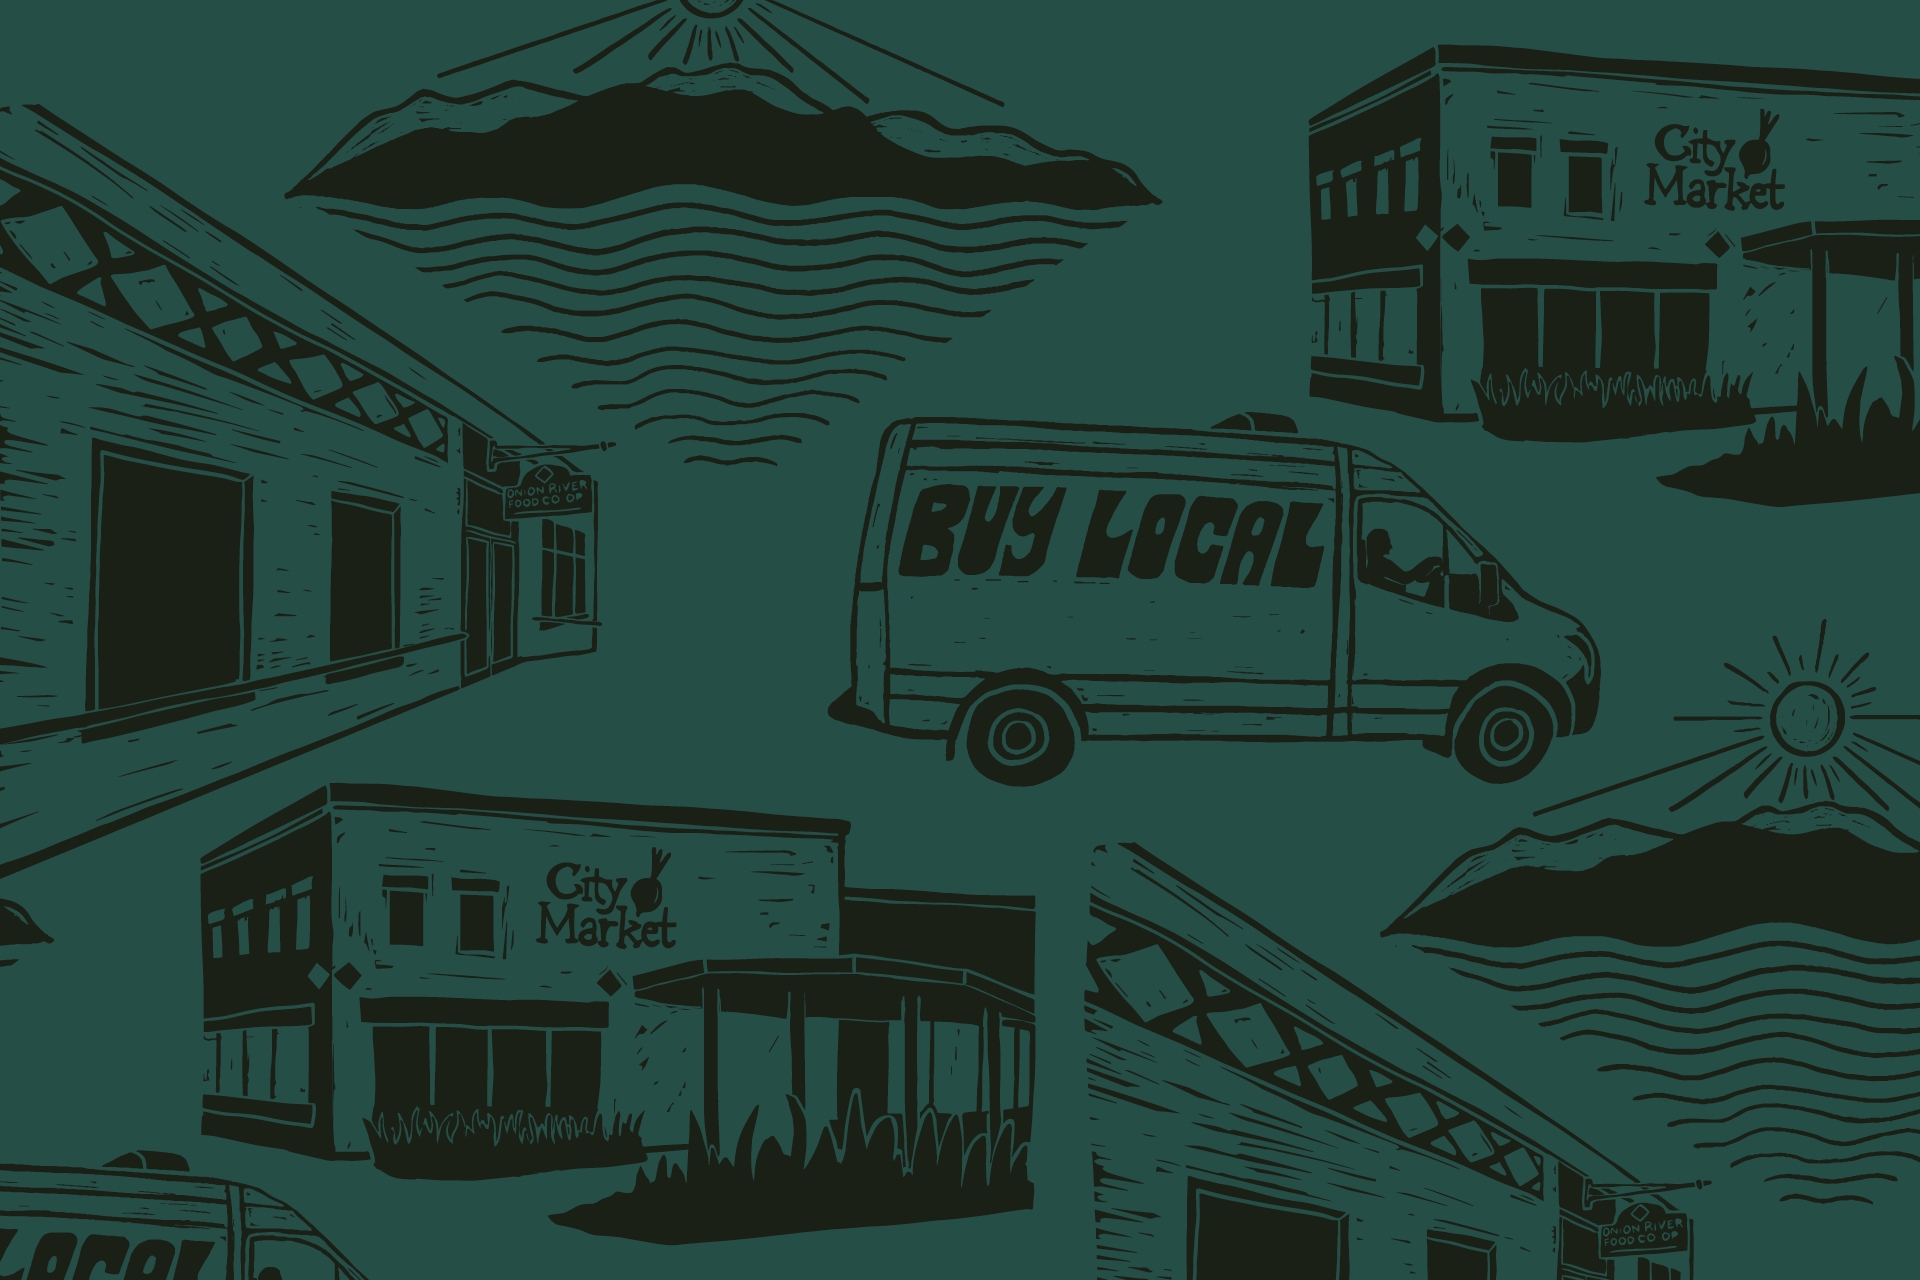 A dark teal field with dark green illustrations depicting the Co-op storefronts through time and a van with "Buy Local" printed on the side.